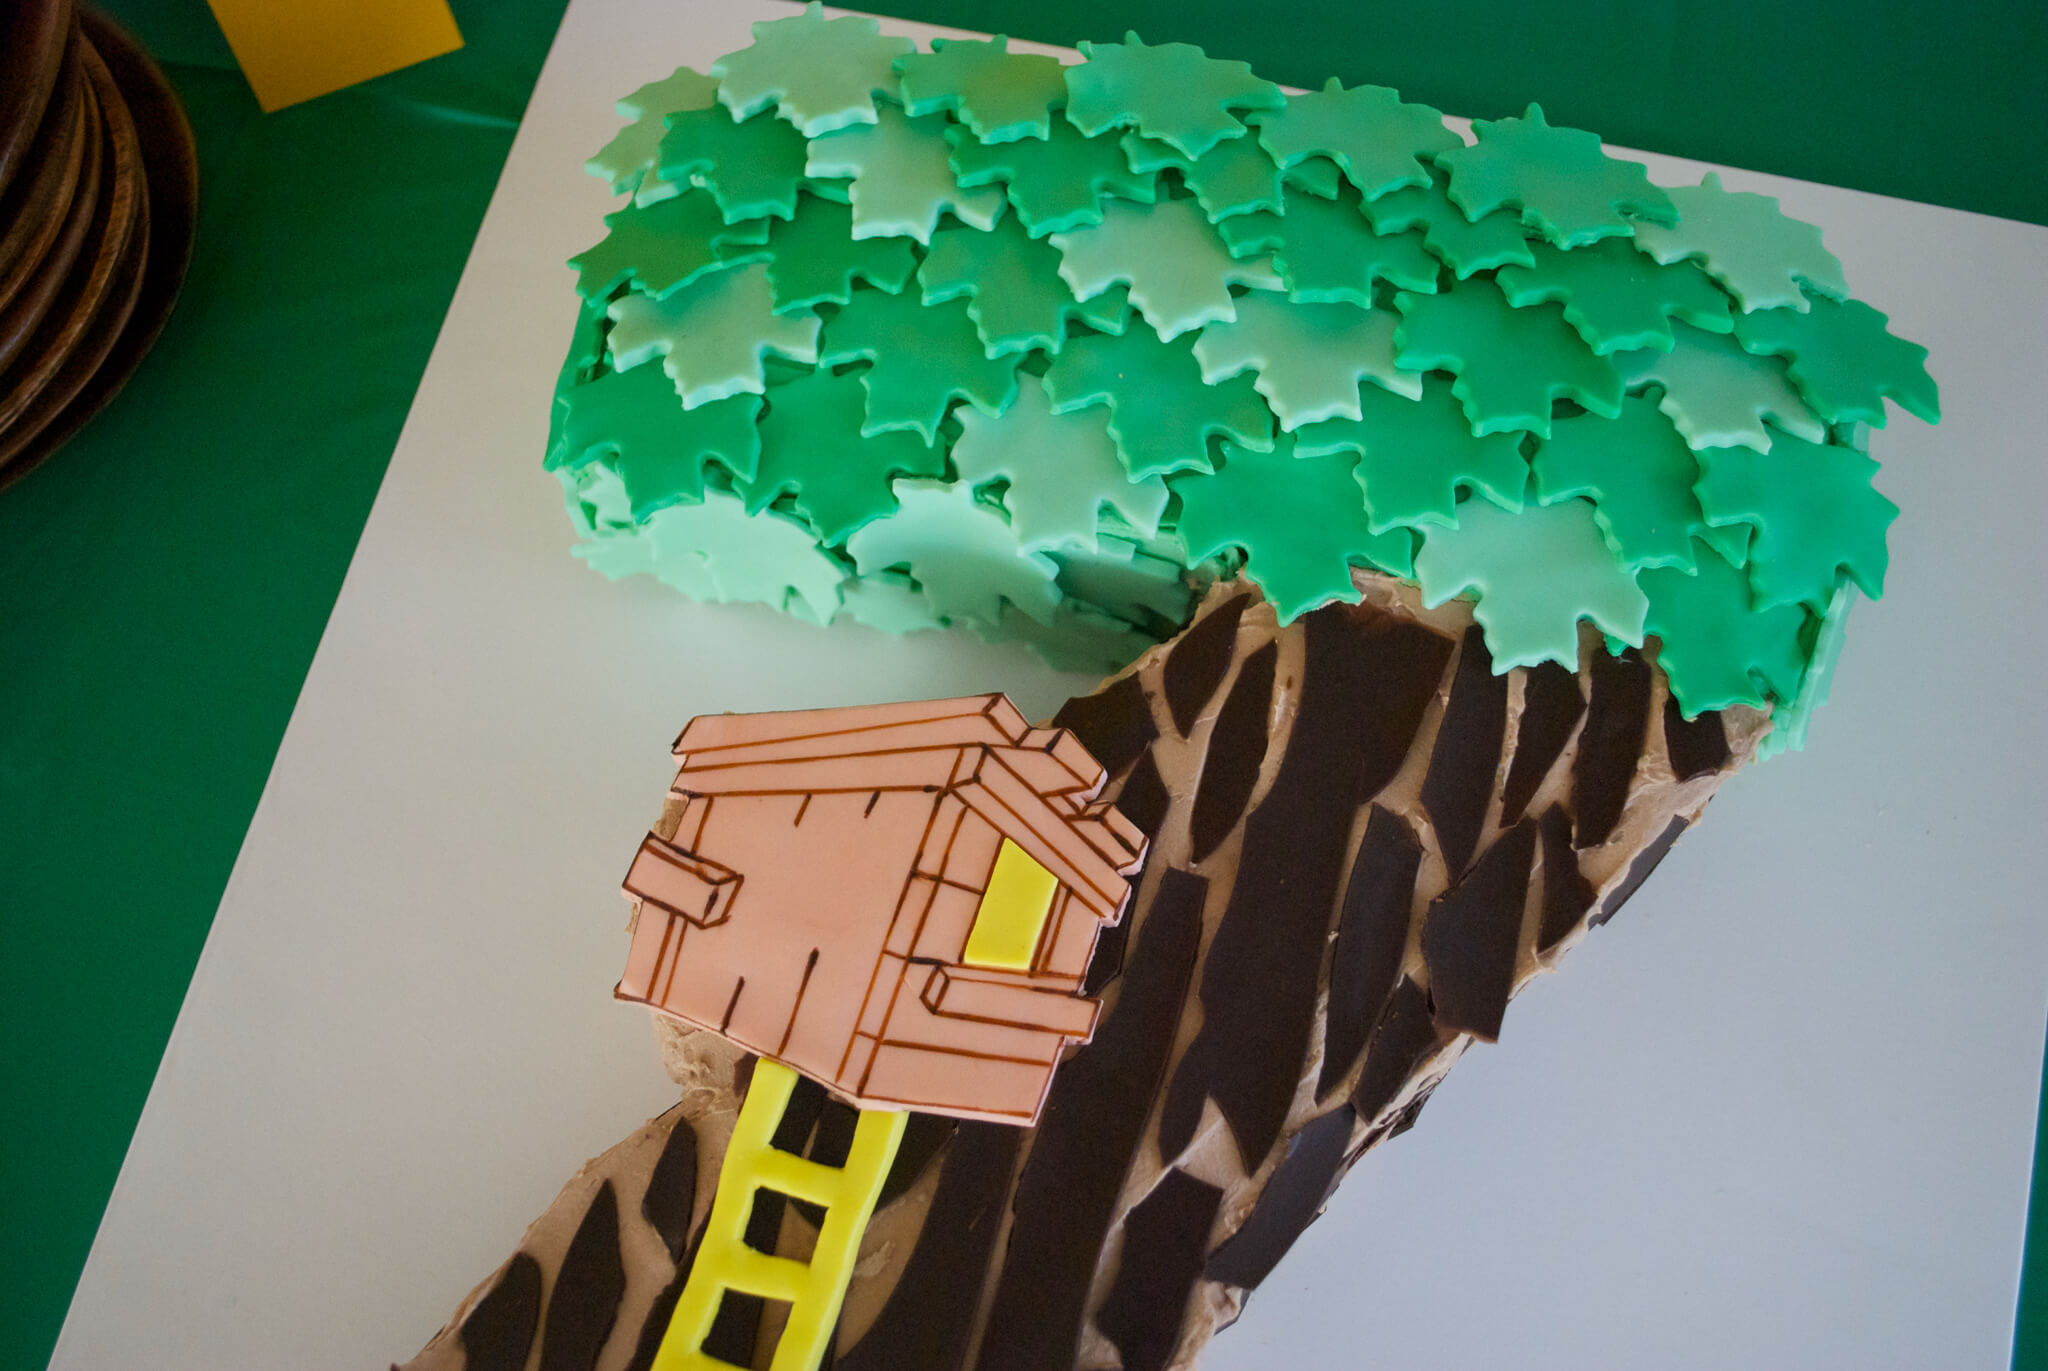 Easy DIY Magic Tree House birthday cake for a Magic Tree House 7th birthday party. Edible tree house and leaves are fondant, bark is chocolate. Get the free printable template to make the tree house and number 7 shaped cake - no special cake pan needed!